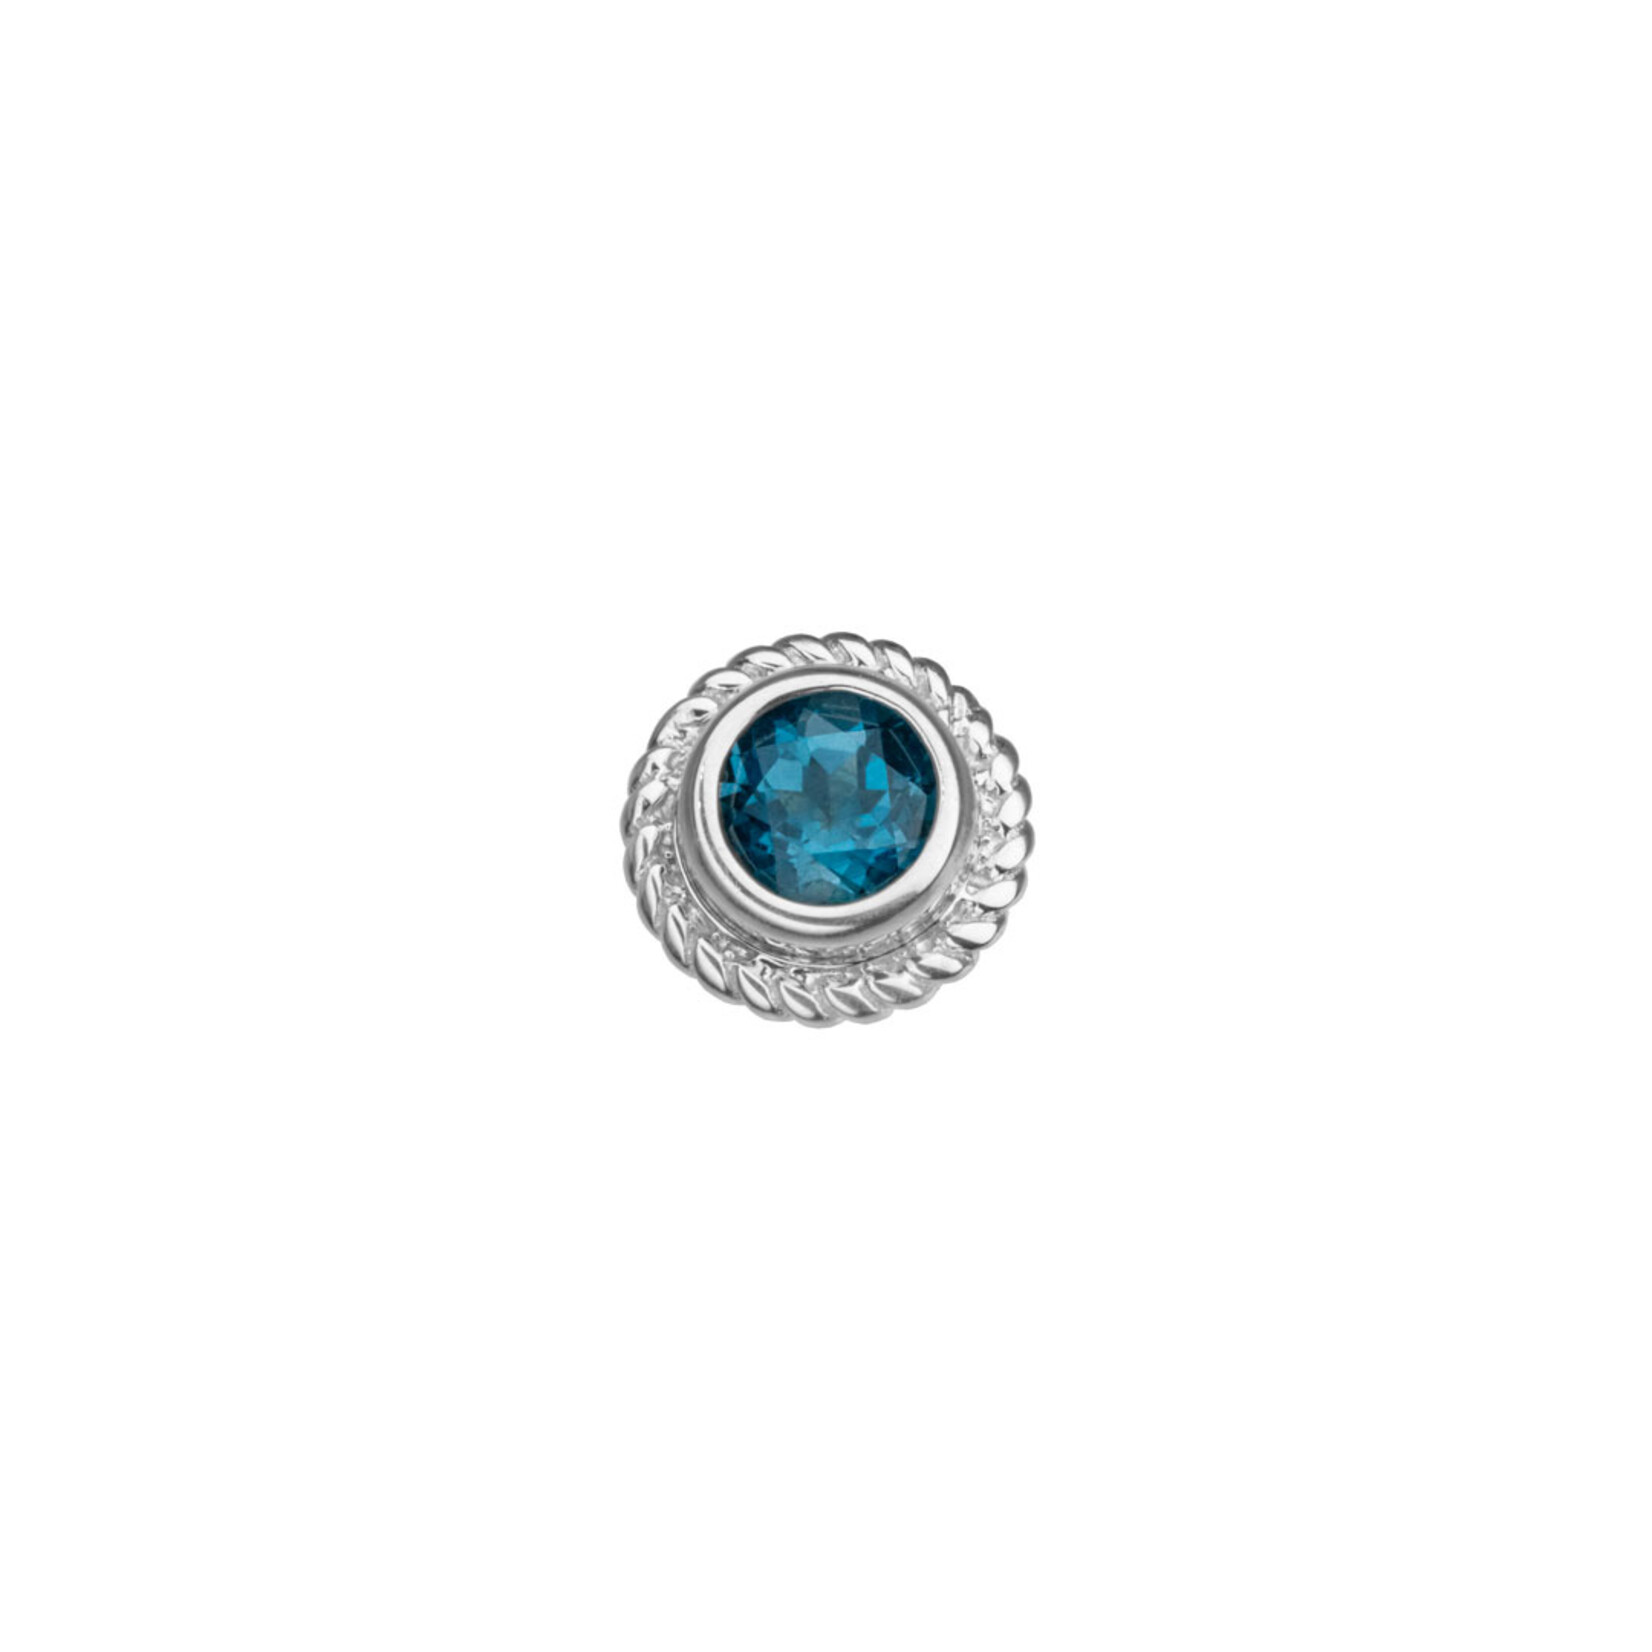 BVLA BVLA white gold 10.5 "Braided Choctaw" threaded end with London Blue Topaz